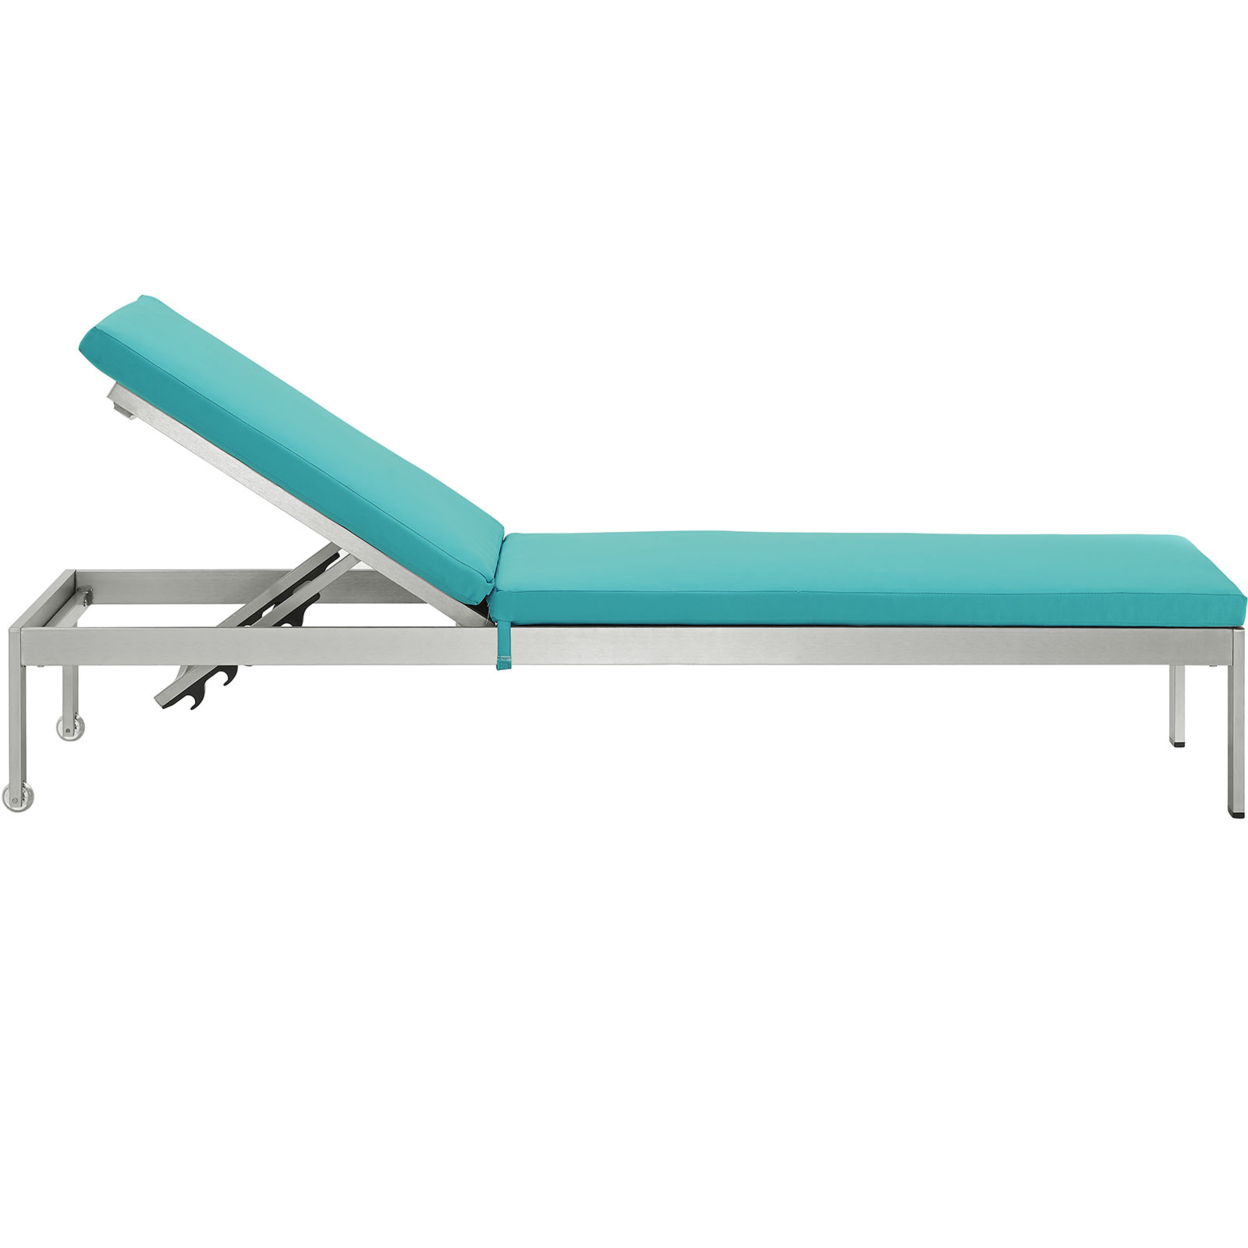 Shore Outdoor Patio Aluminum Chaise with Cushions Silver Turquoise - image 3 of 5